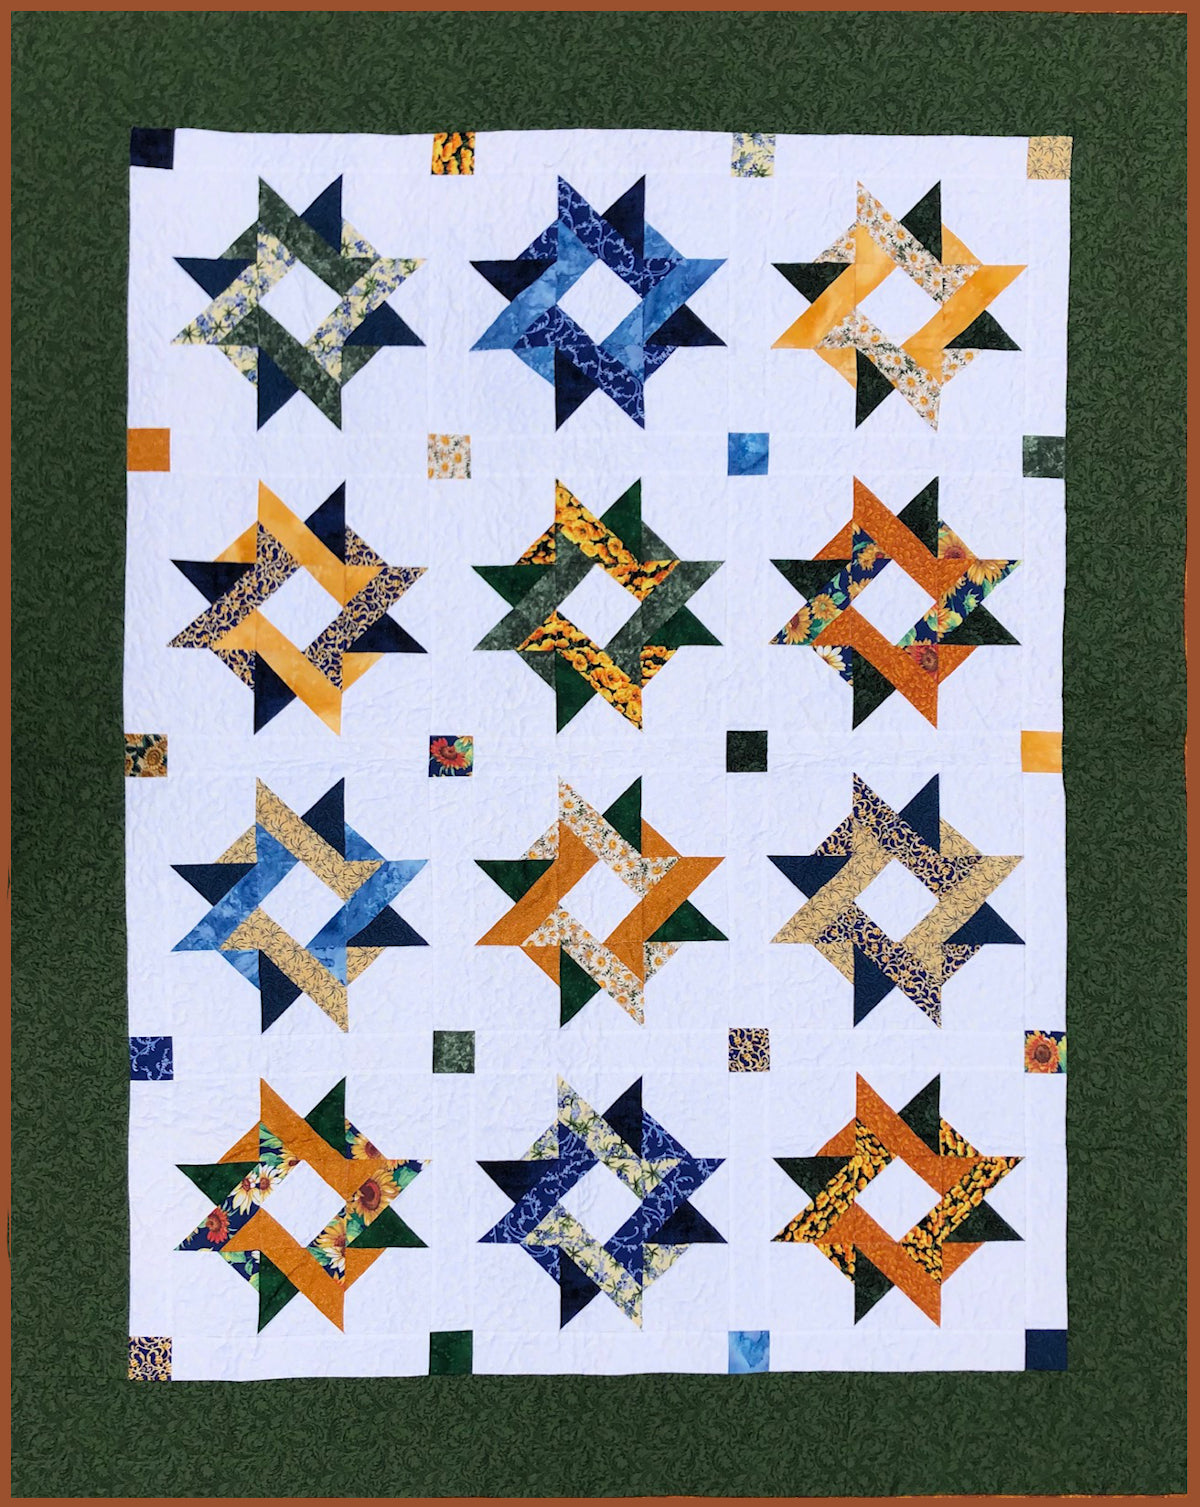 starry patchwork quilt is truly patchwork when made as a scrappy quilt - quilt pattern available